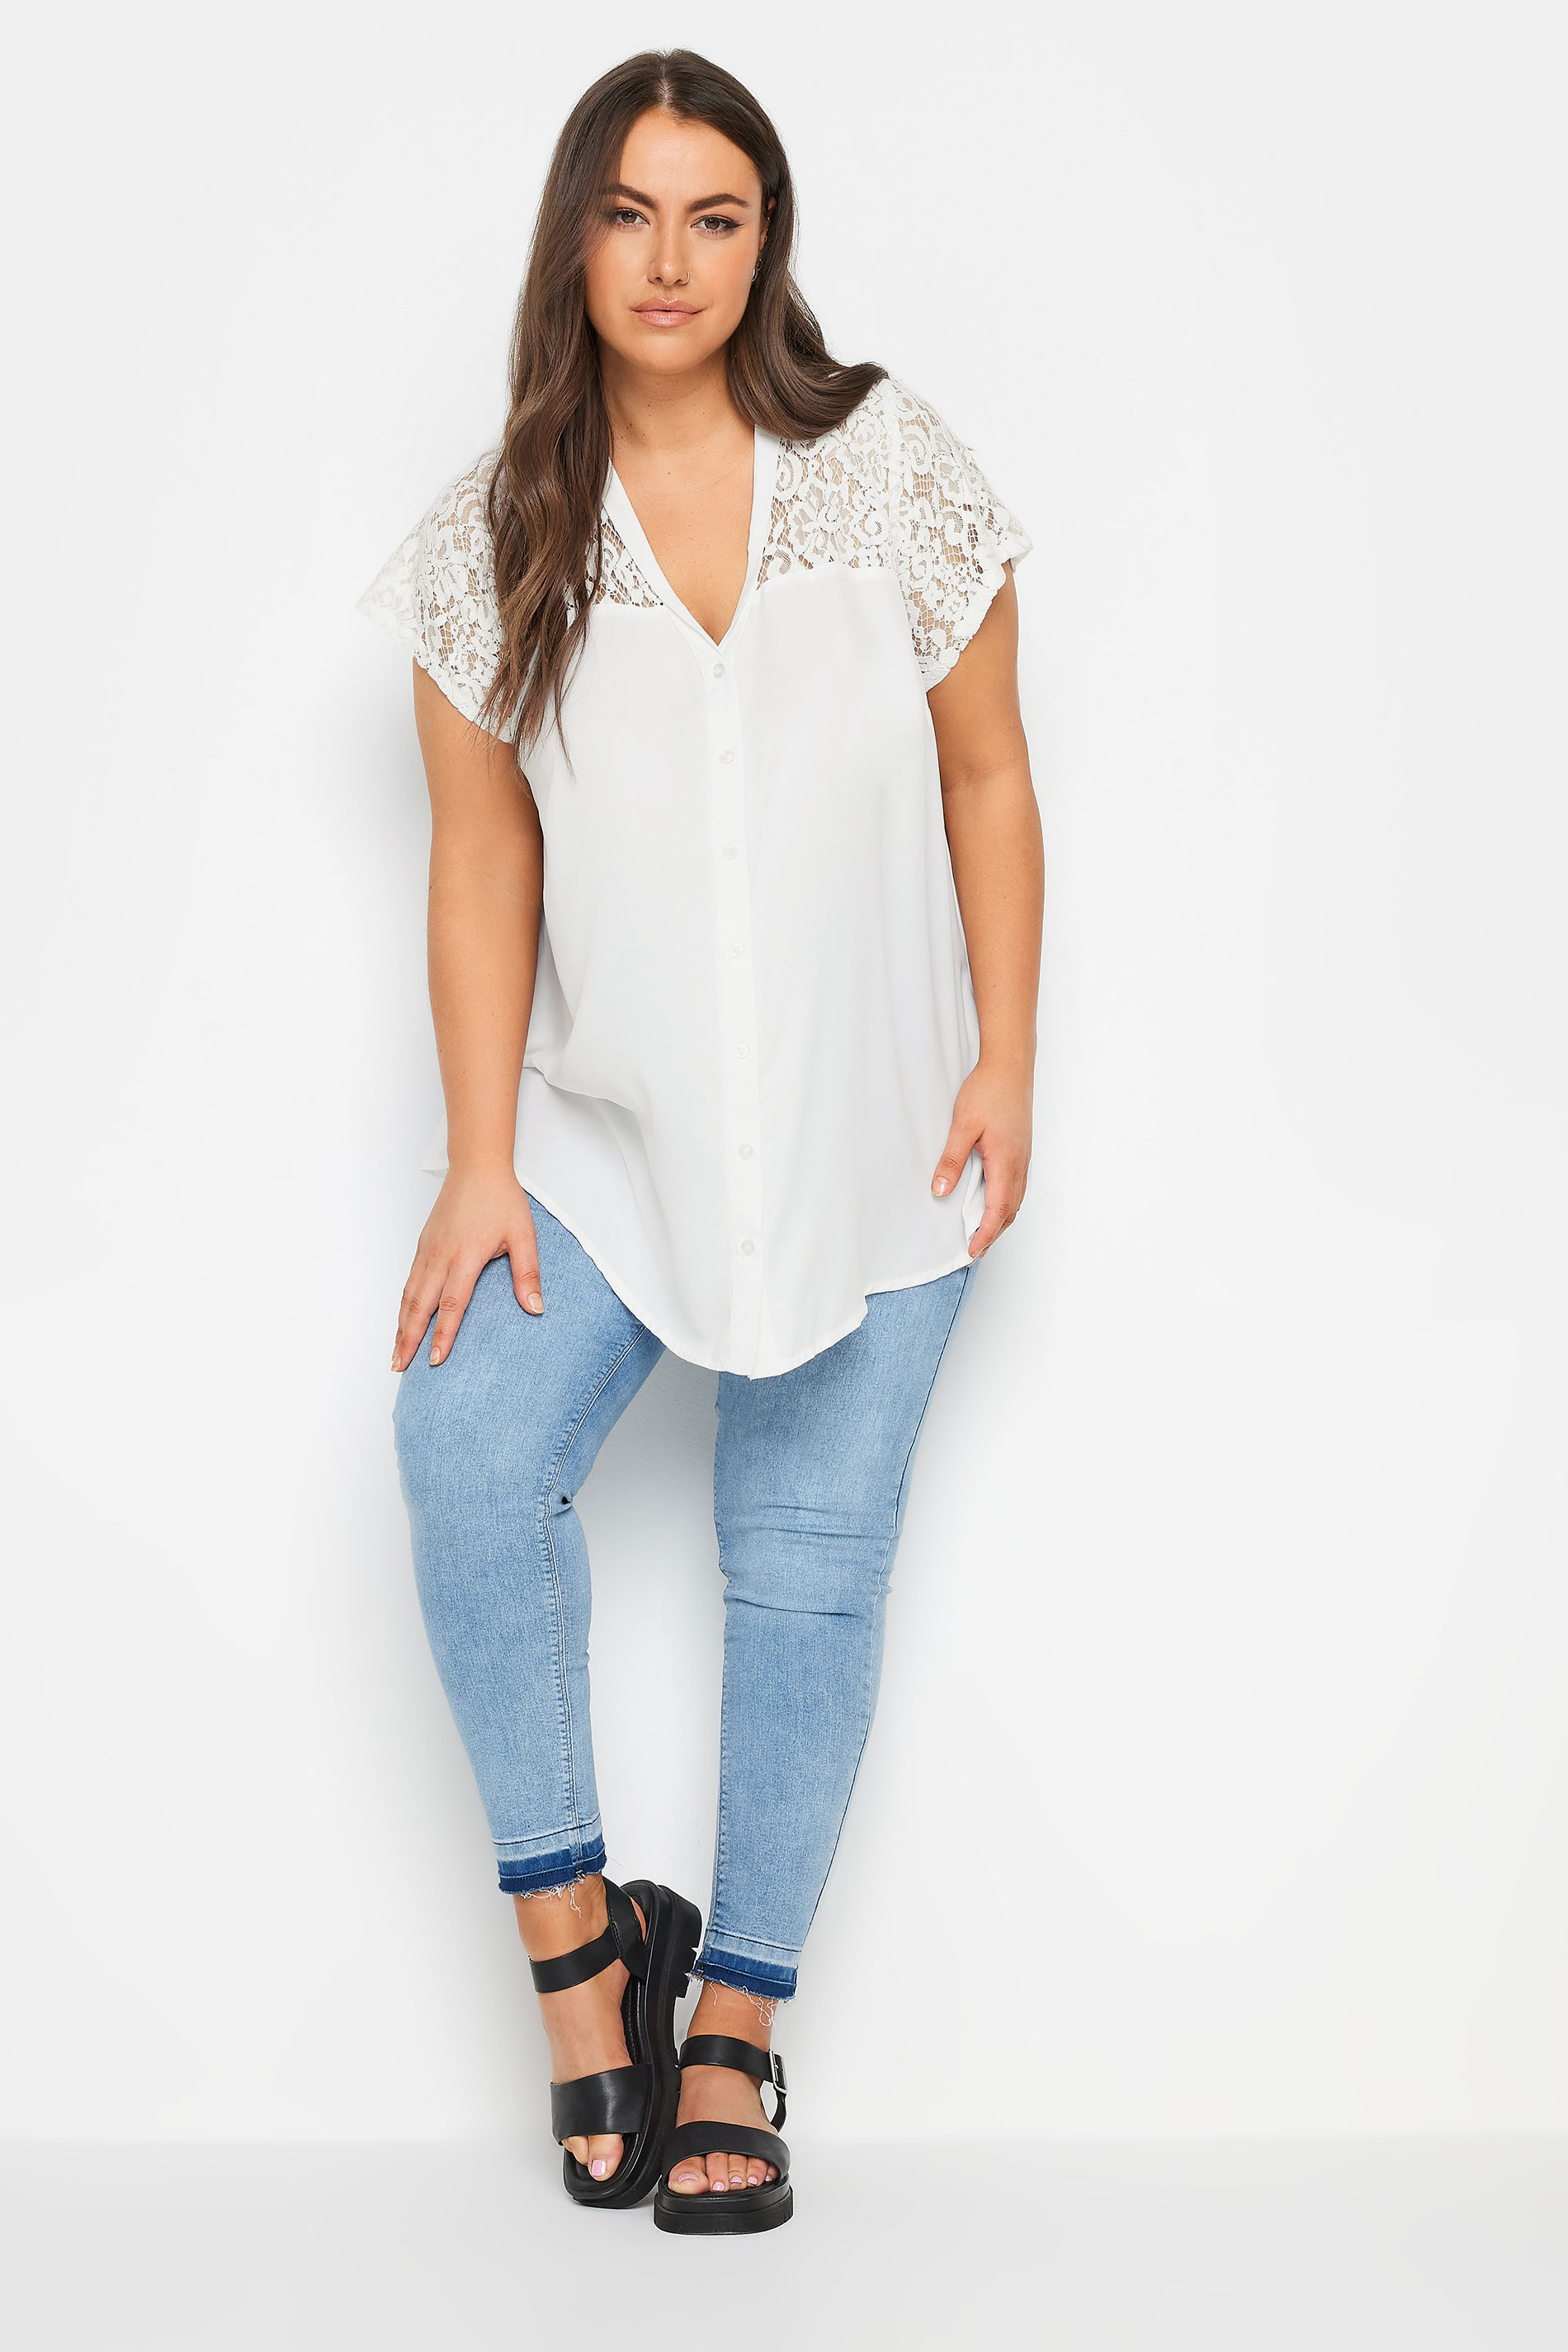 LIMITED COLLECTION Plus Size White Lace Insert Blouse | Yours Clothing 2